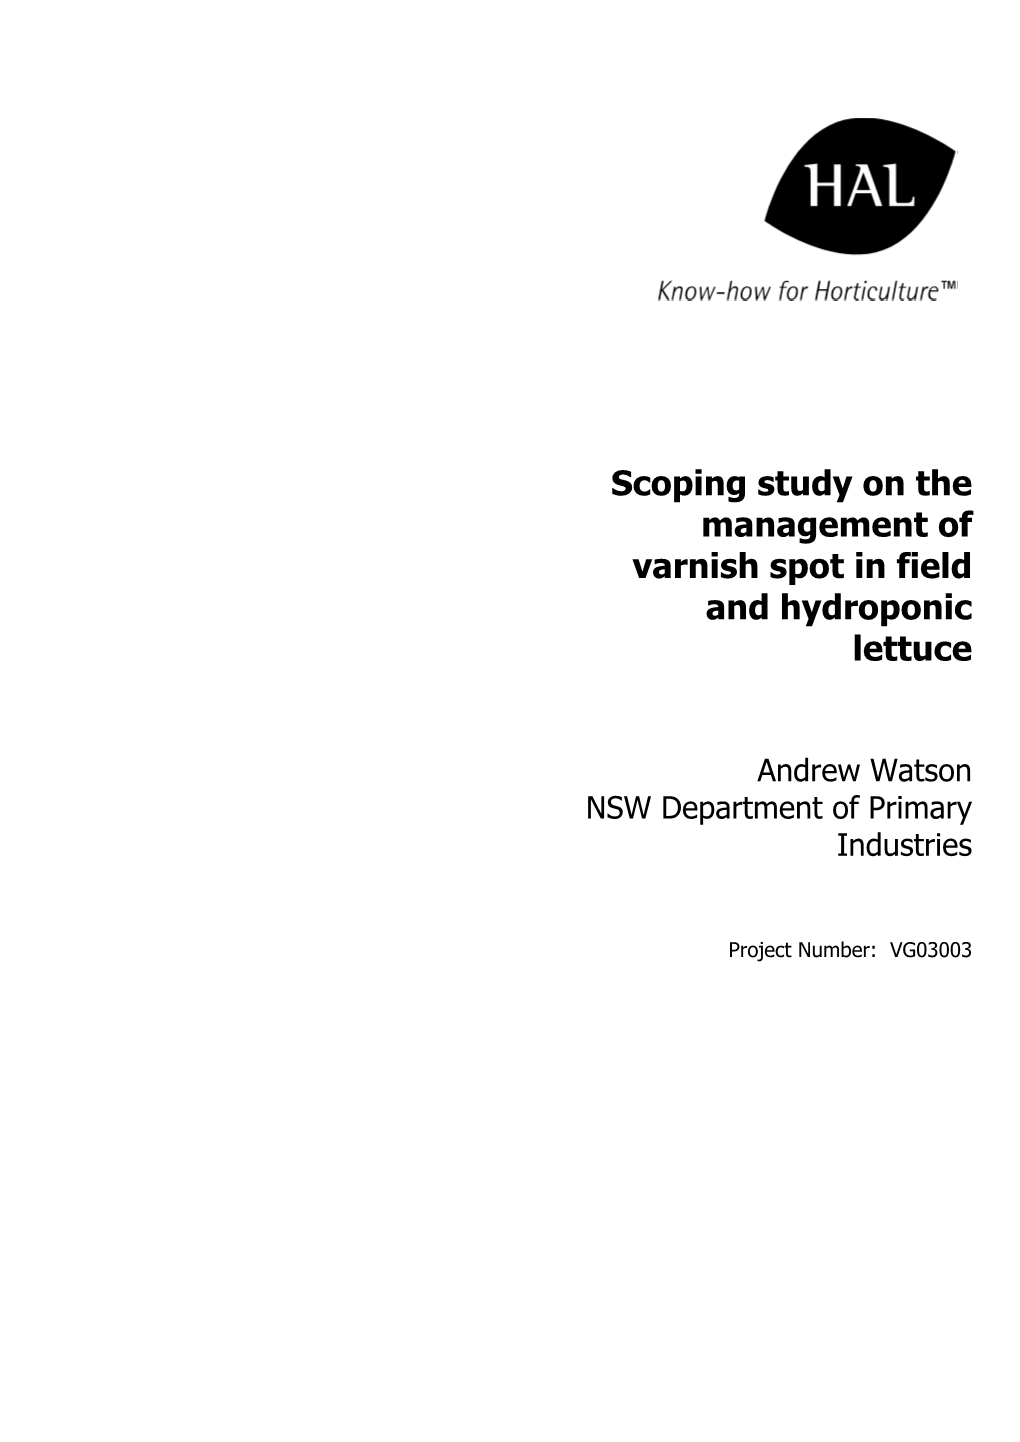 Scoping Study on the Management of Varnish Spot in Field and Hydroponic Lettuce